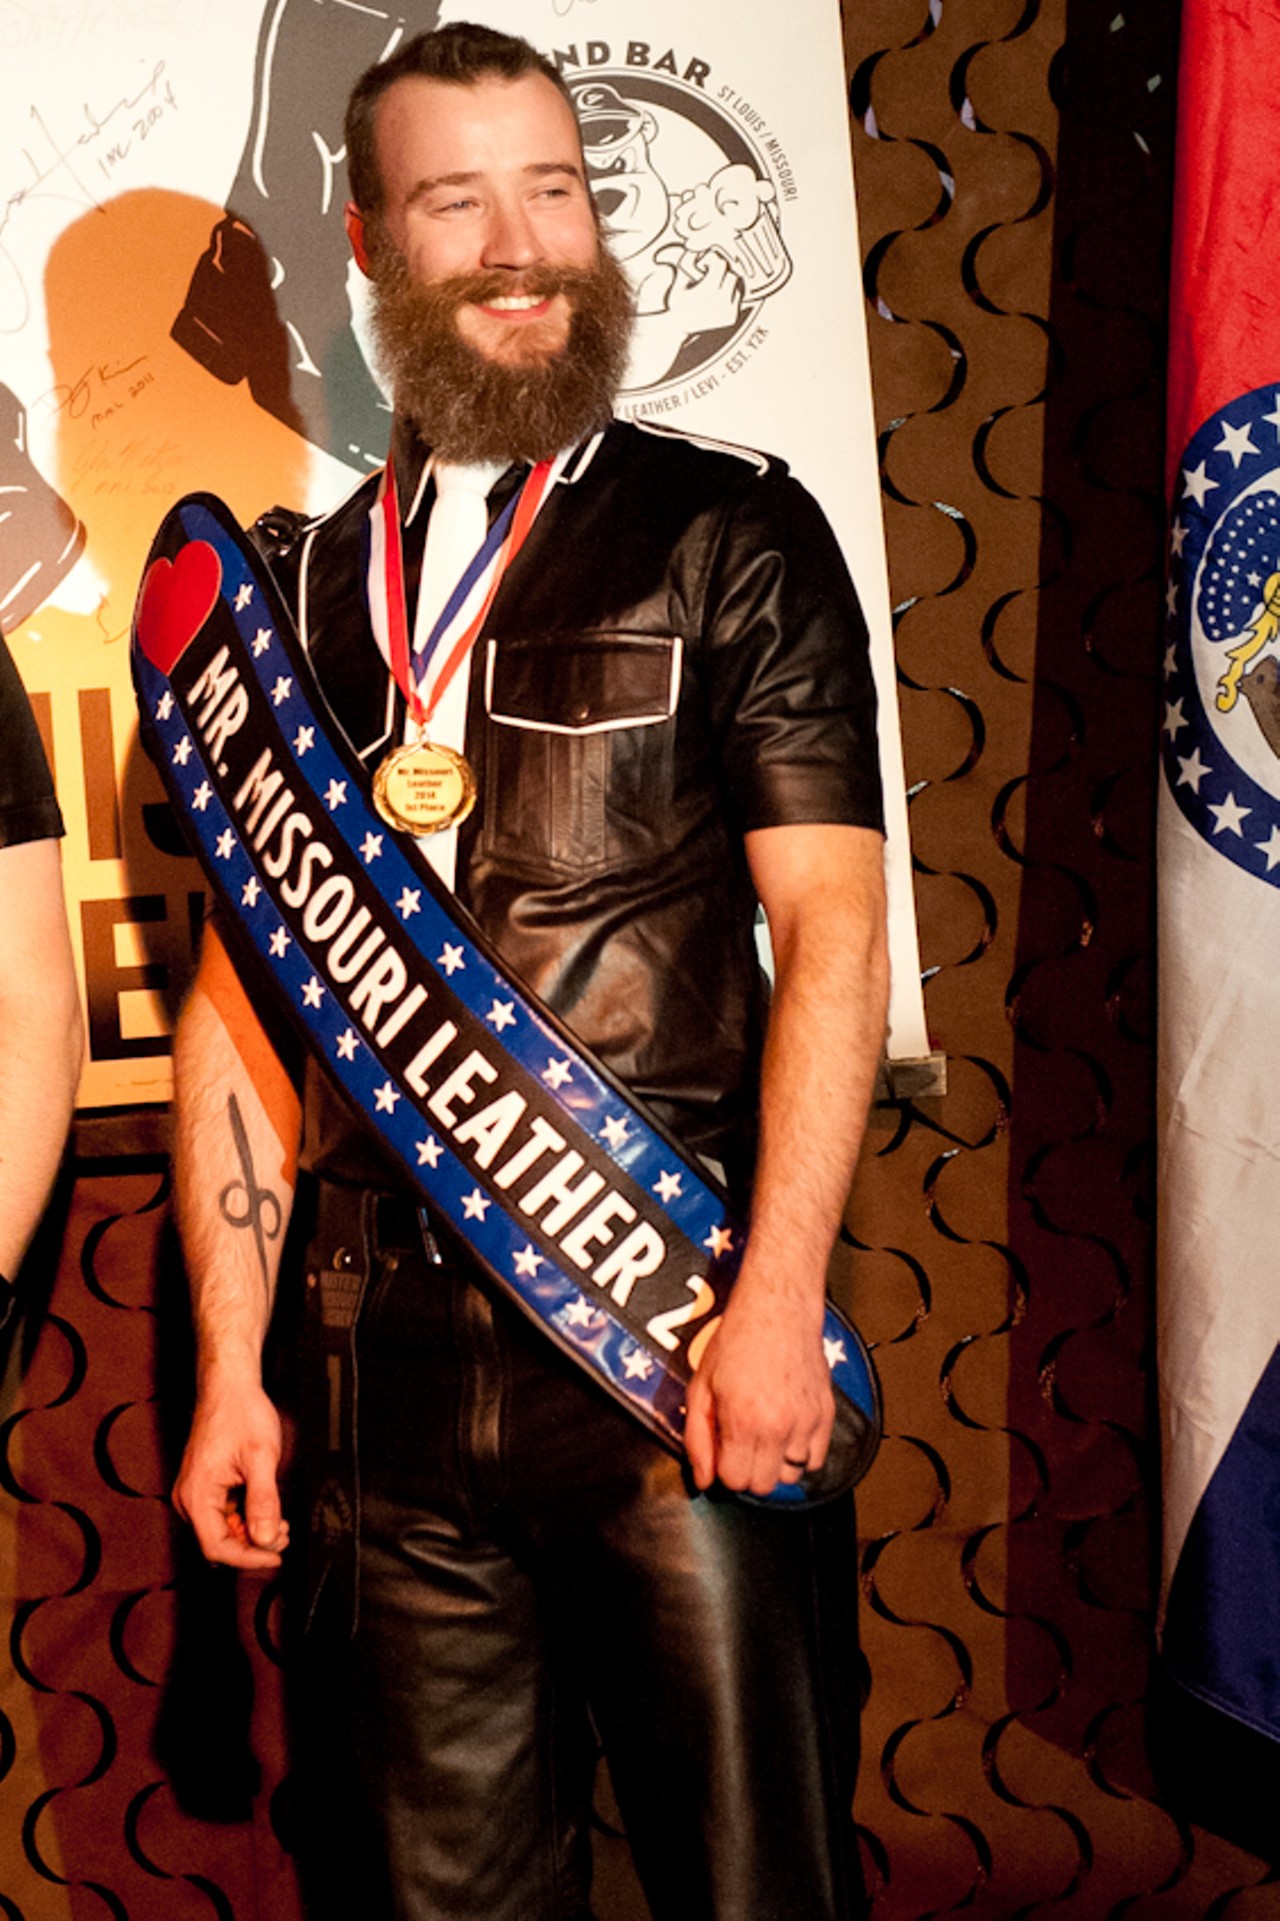 David Payne, shortly after he was named Mr. Missouri Leather 2014.